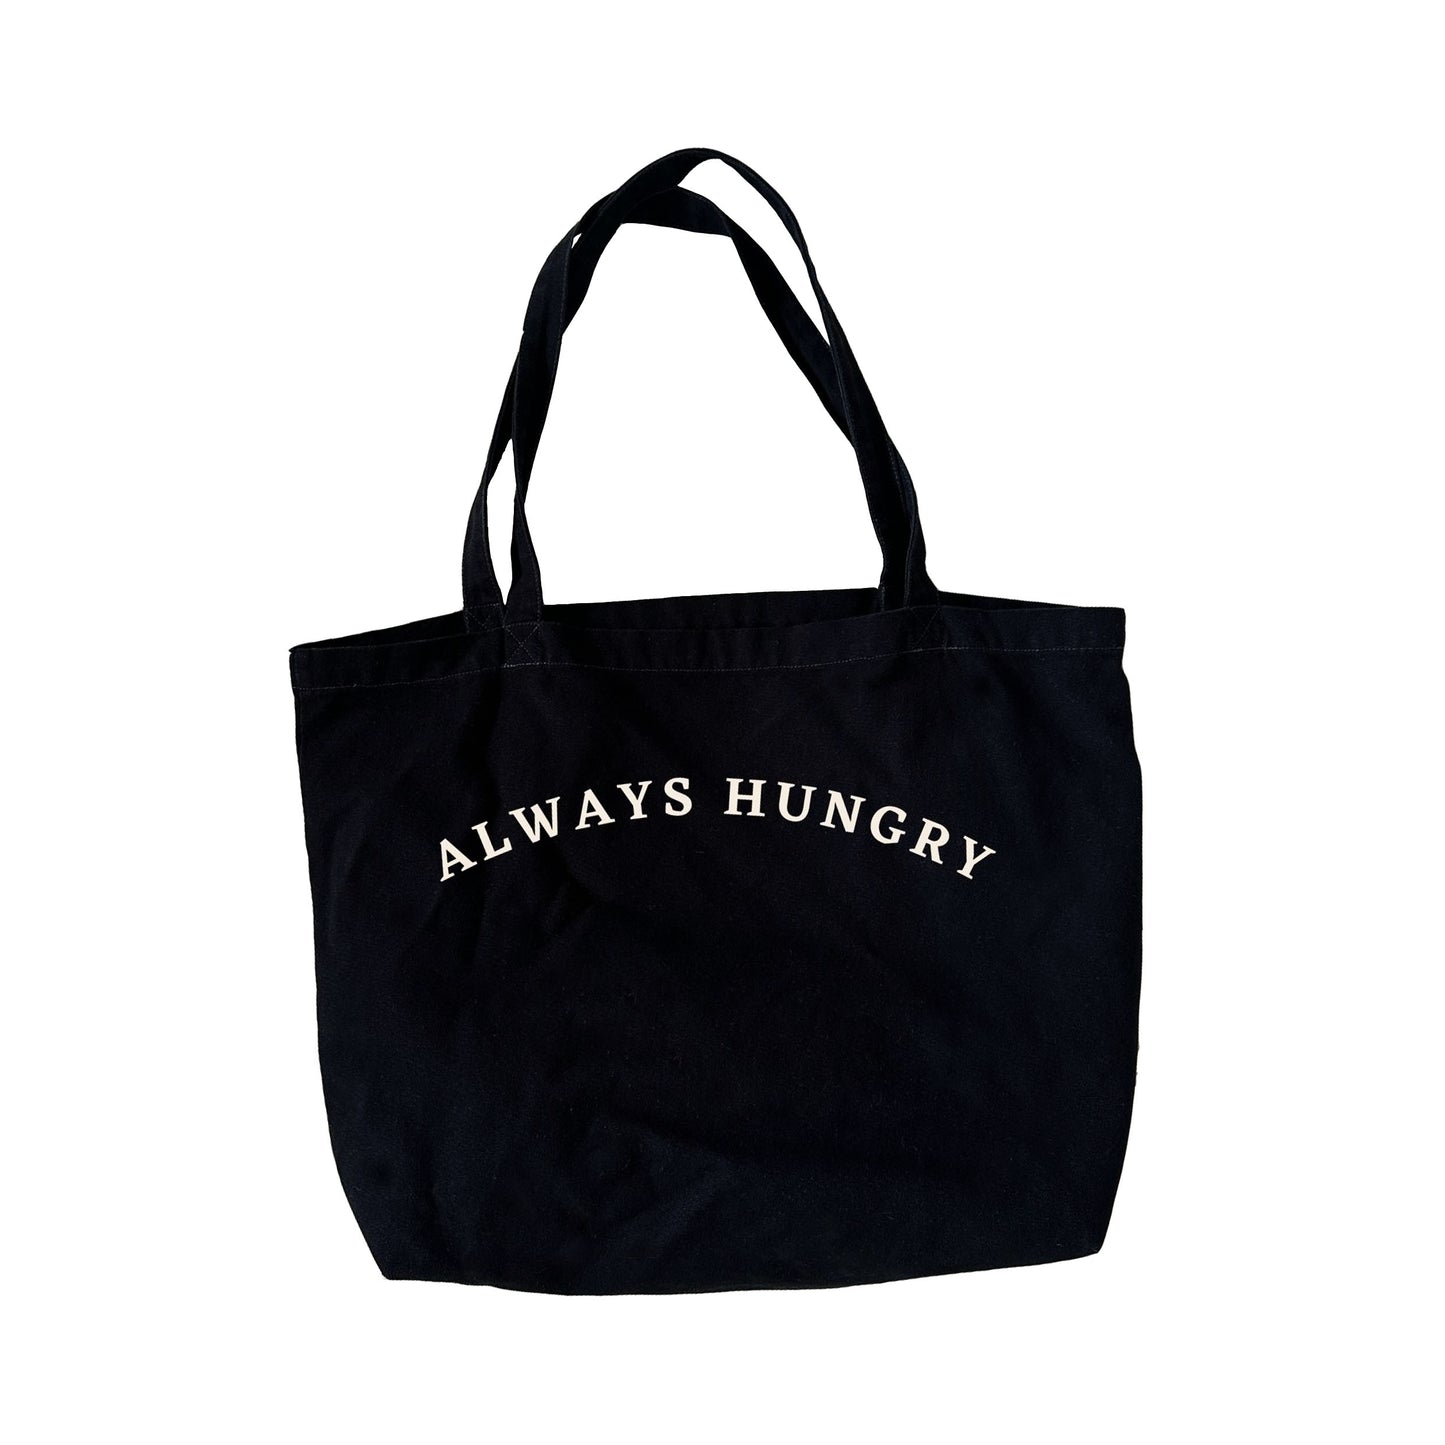 Always hungry tote bag